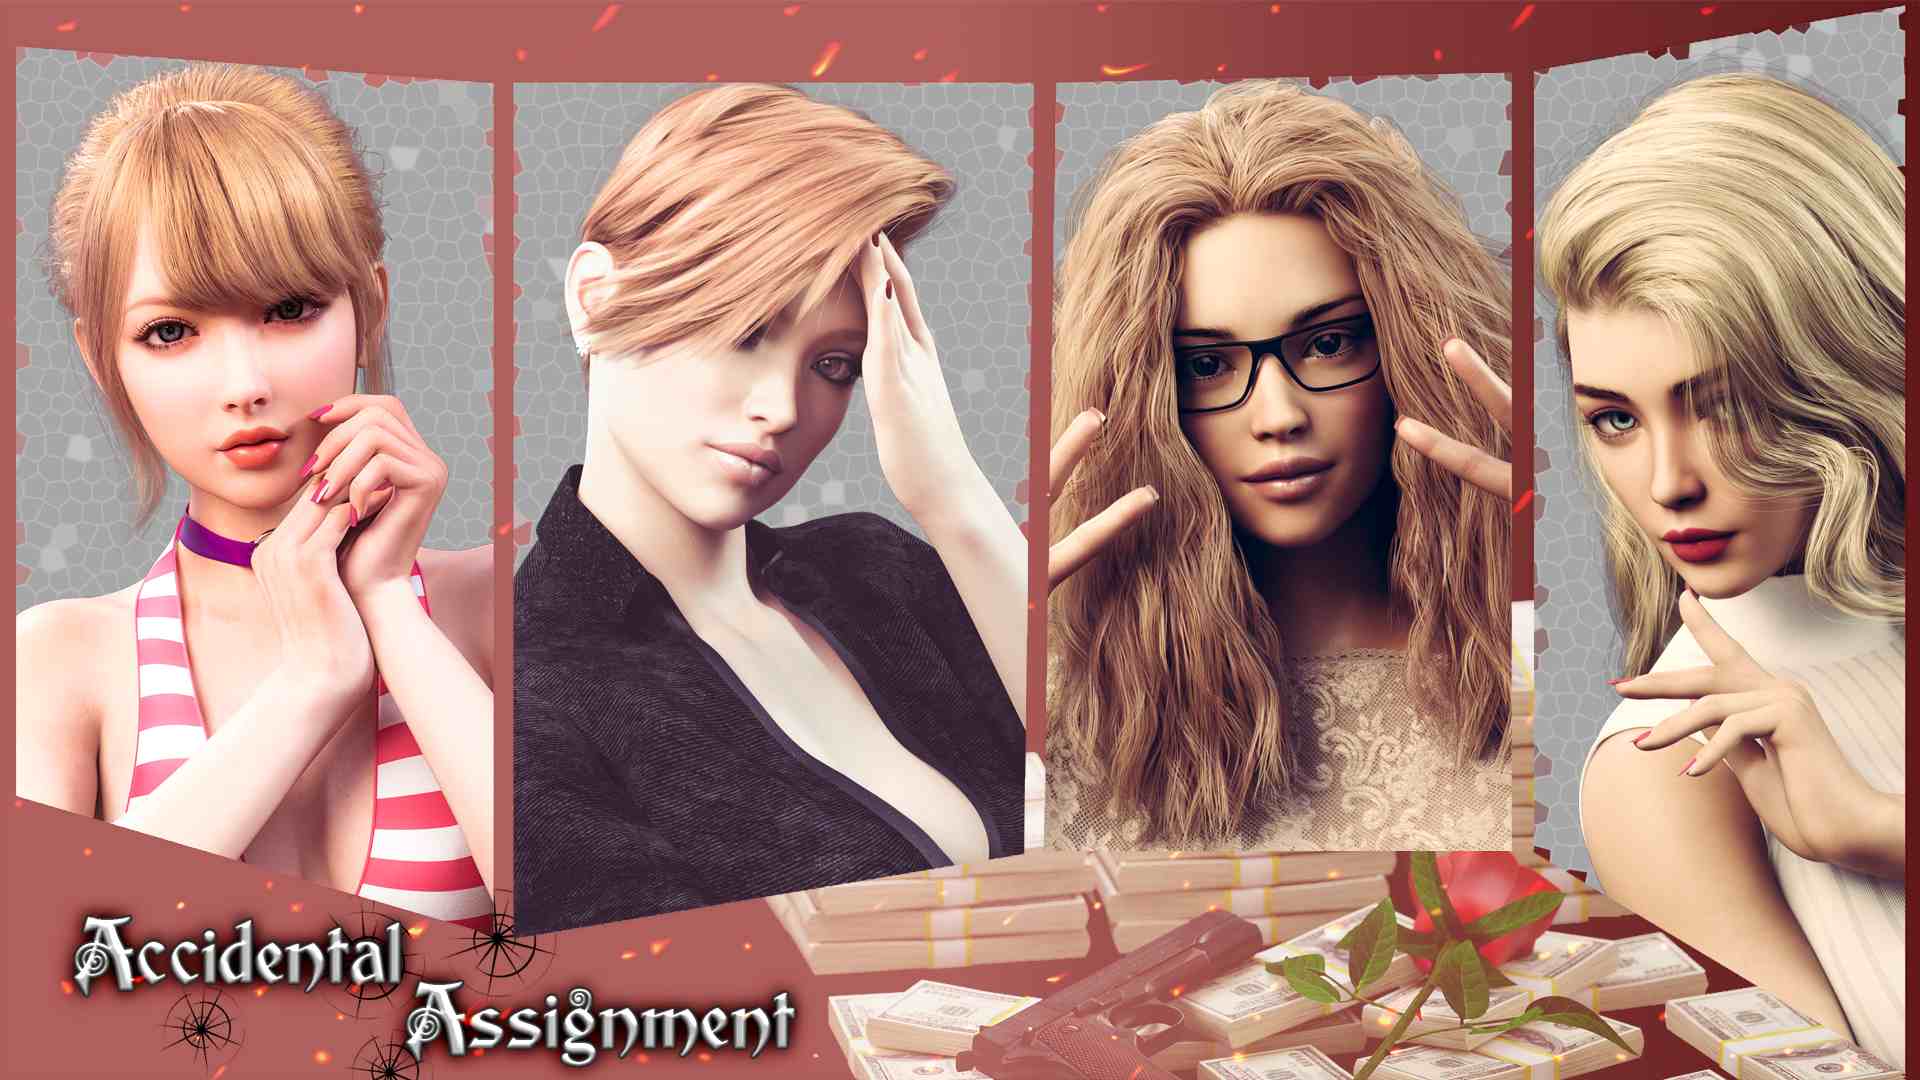 Accidental Assignment [Cainito Studio] Adult xxx Game Download